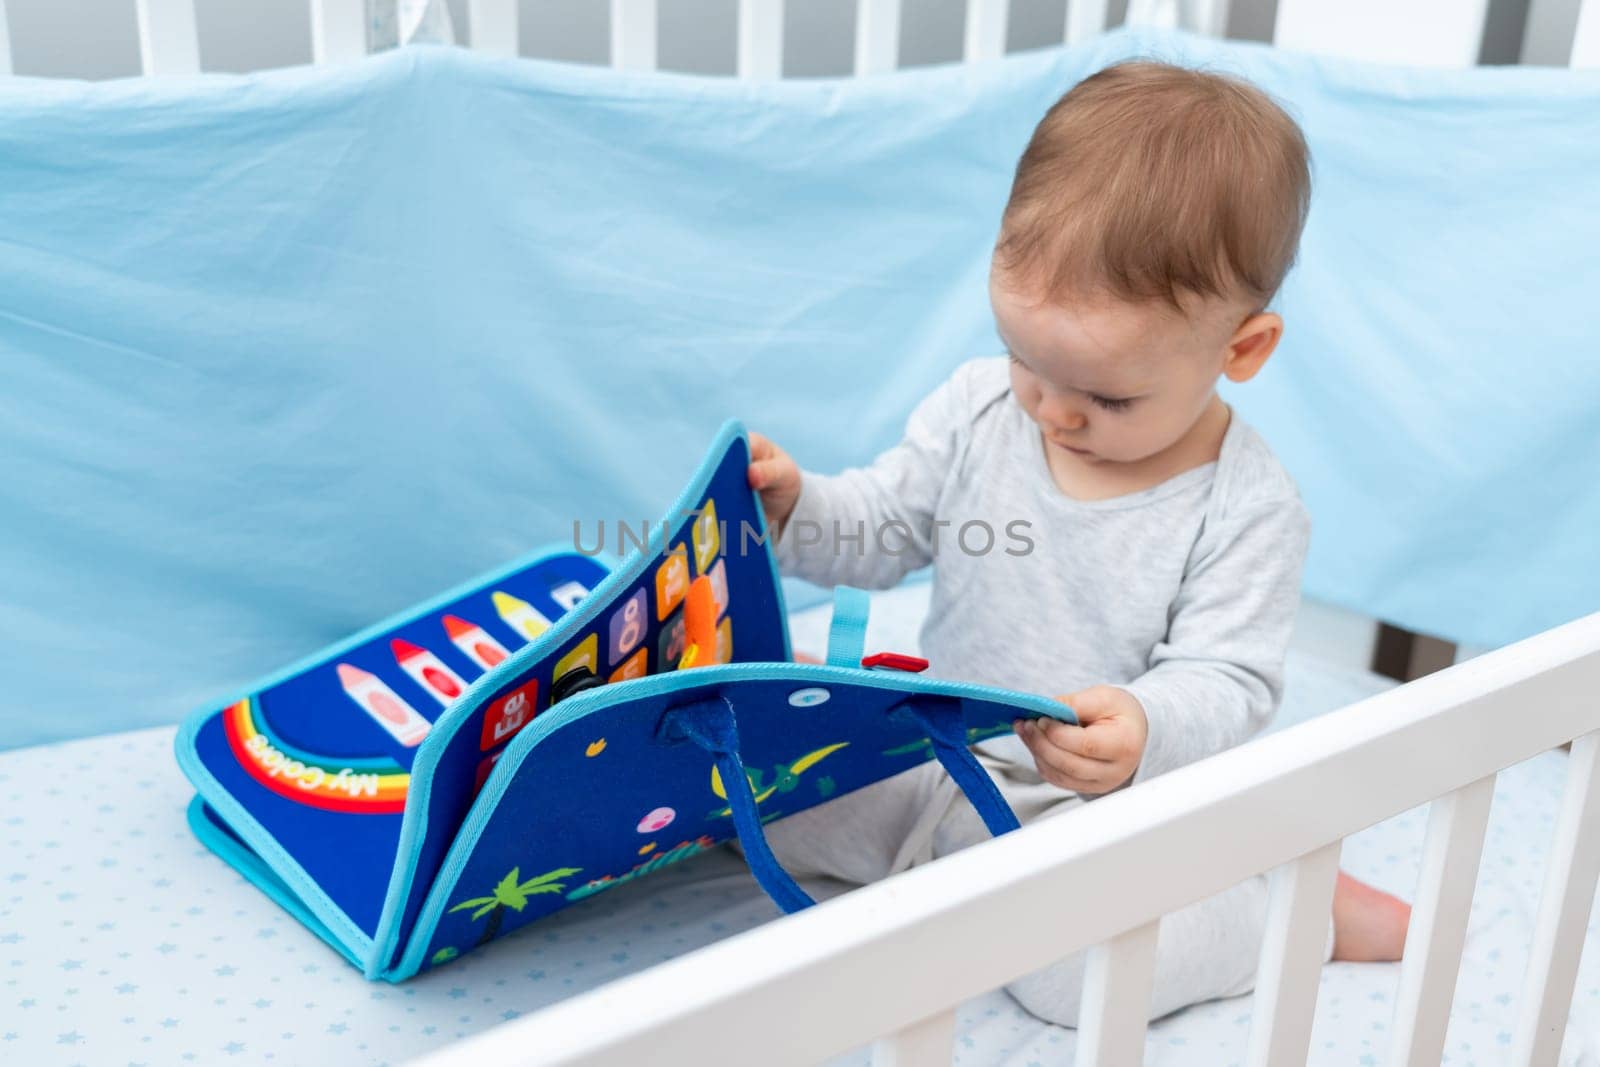 Baby playing with montessori busy book sitting in crib. Concept of smart books and modern toys by Mariakray